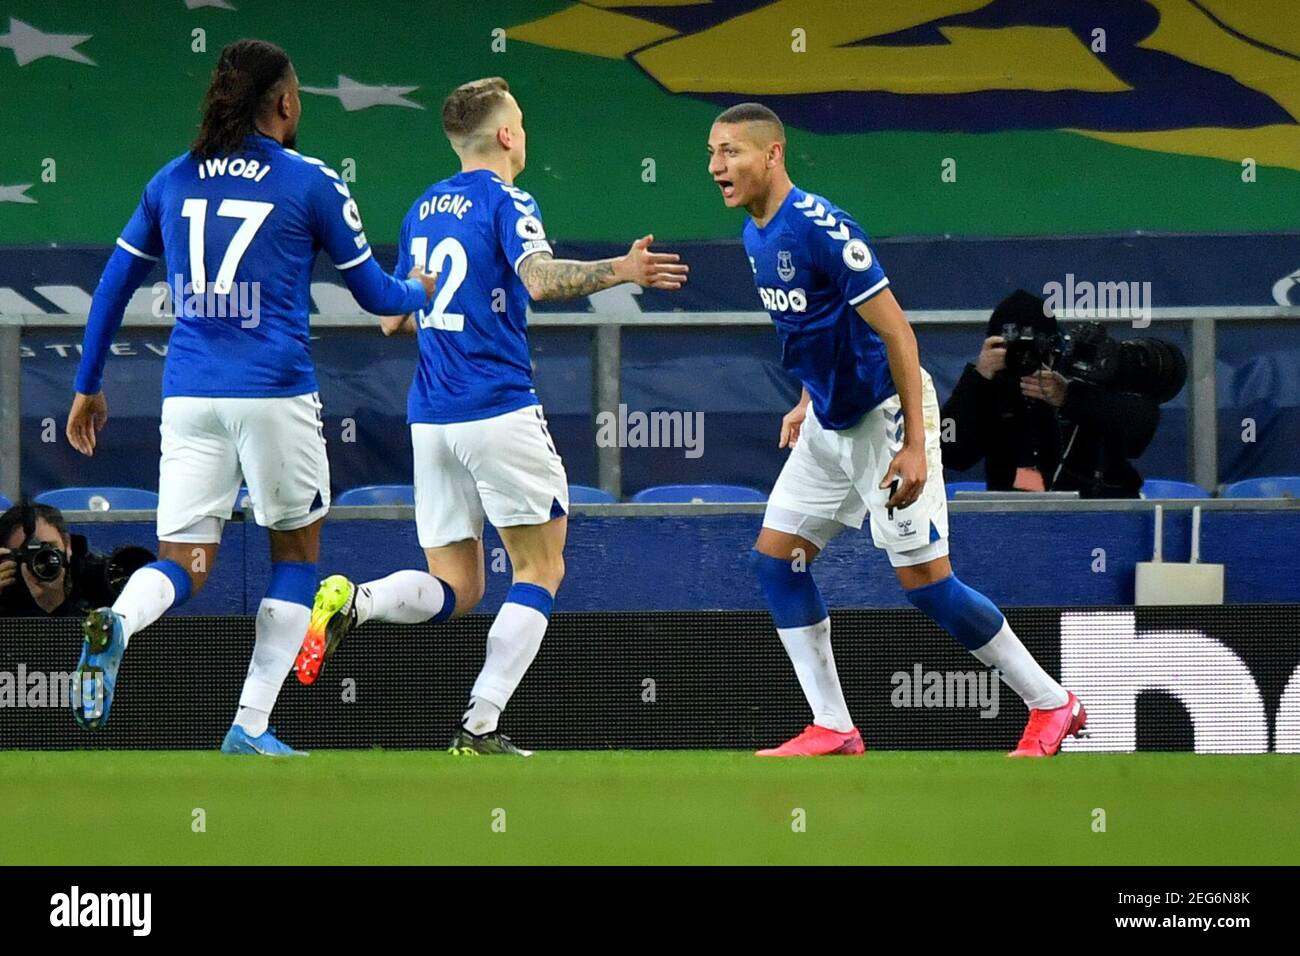 Liverpool, United Kingdom, 17th February 2021. Pictured left to right, Everton’s Alex Iwobi and Everton’s Lucas Digne celebrate Everton's Richarlison scoring his side's first goal of the game. Credit: Anthony Devlin/Alamy Live News Stock Photo